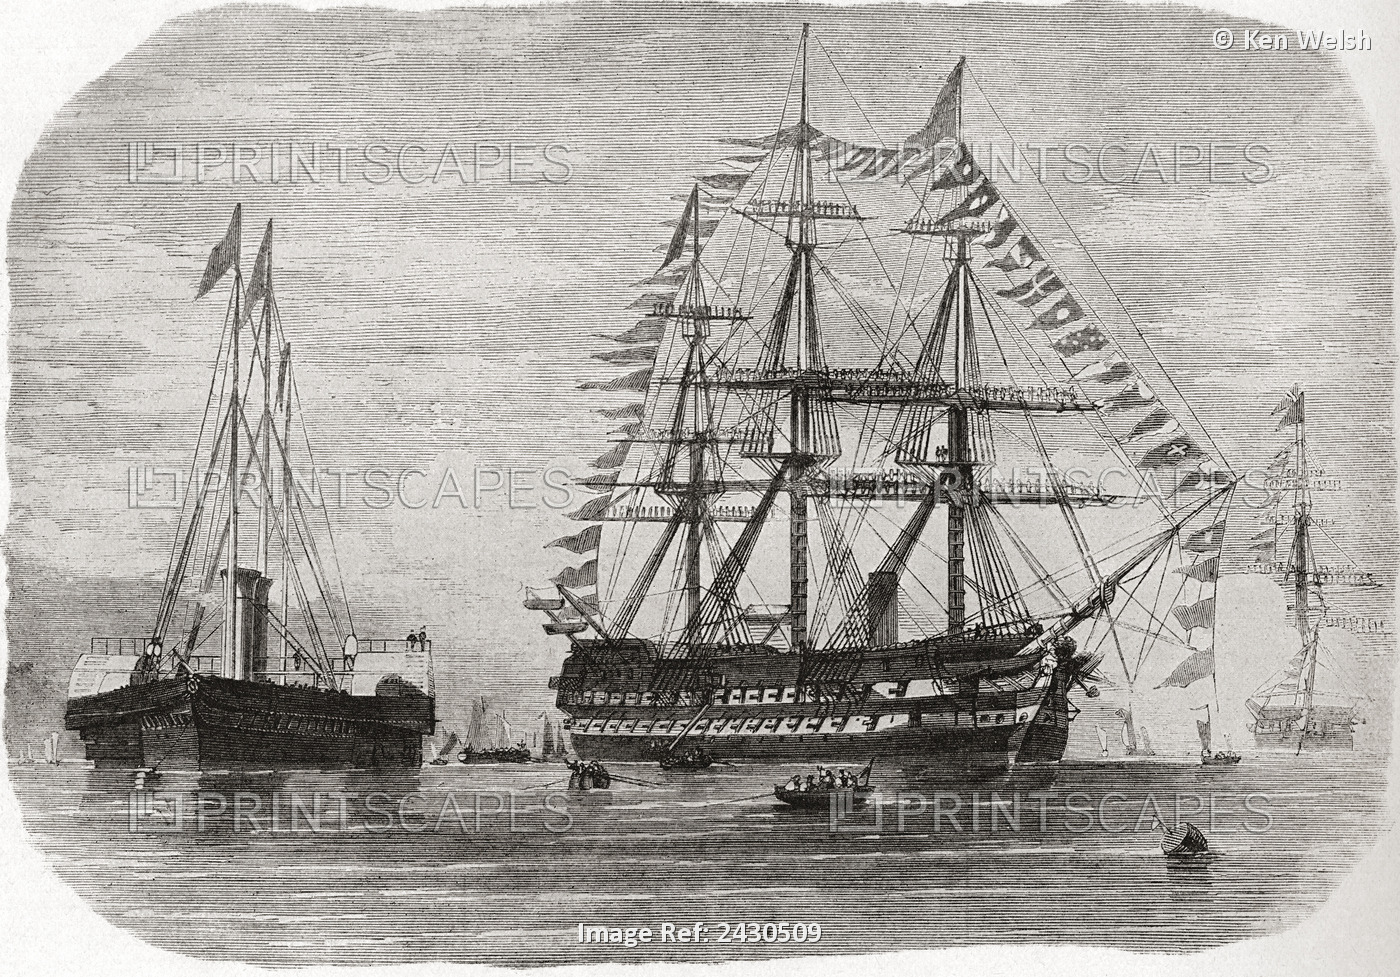 Hms Hero In 1860. A 91 Gun Ship-Of-The-Line. From Edward Vii His Life And ...